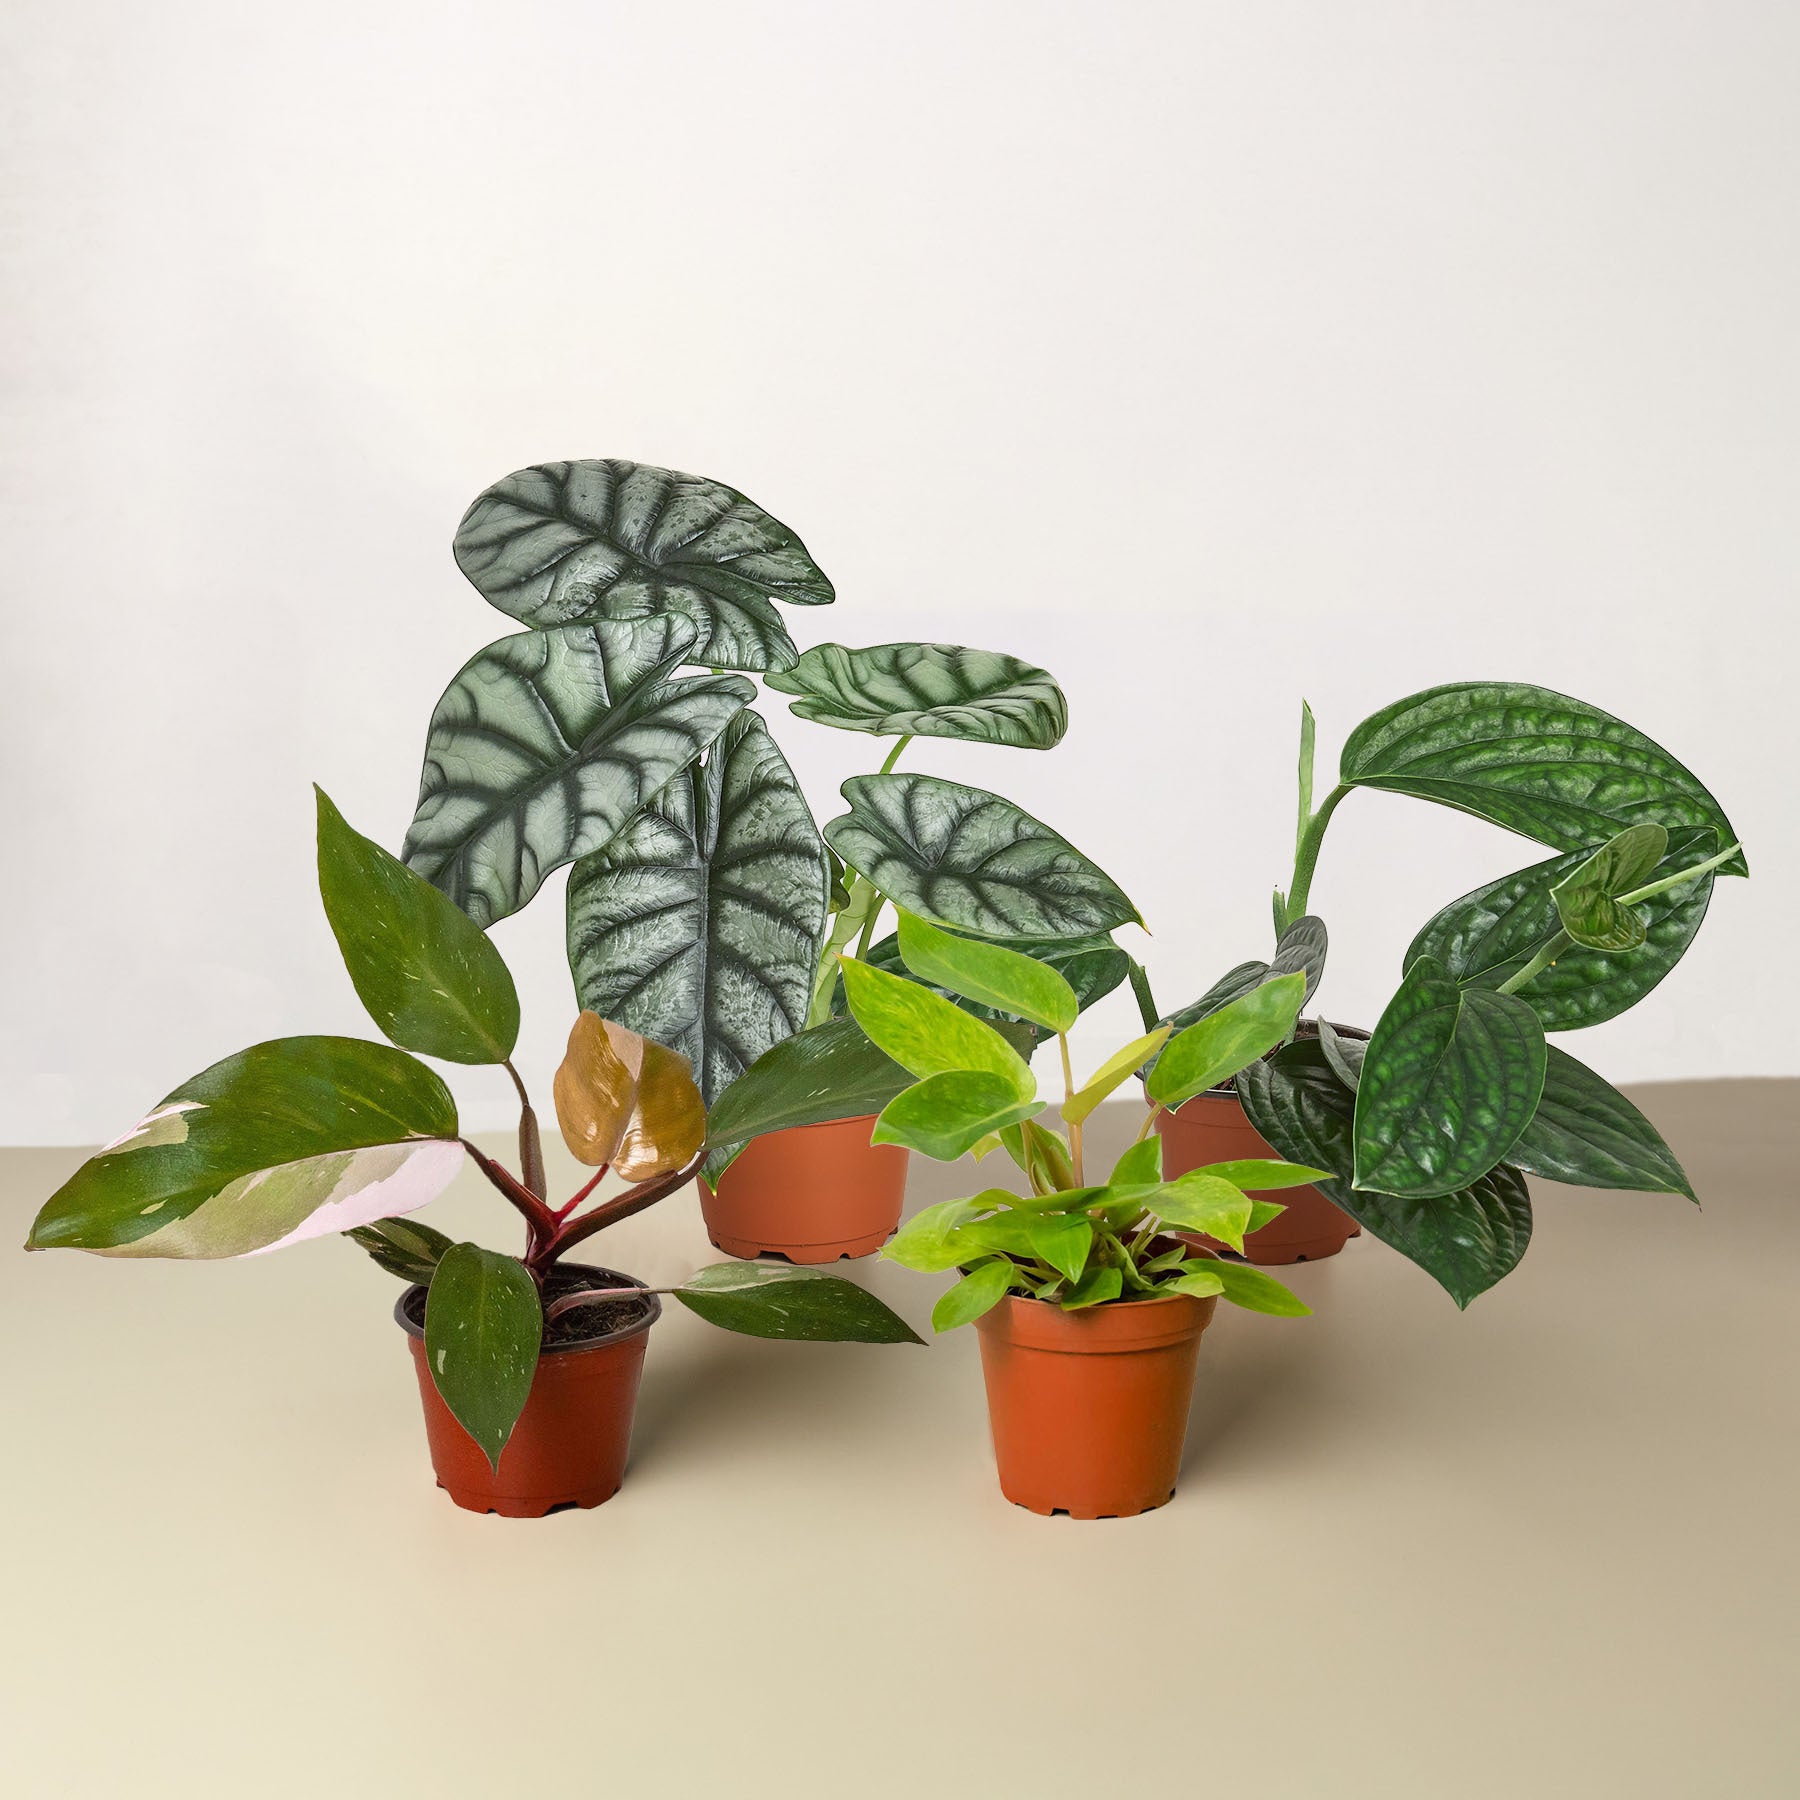 Four potted plants on a table in front of a white background, available at a plant nursery near me.